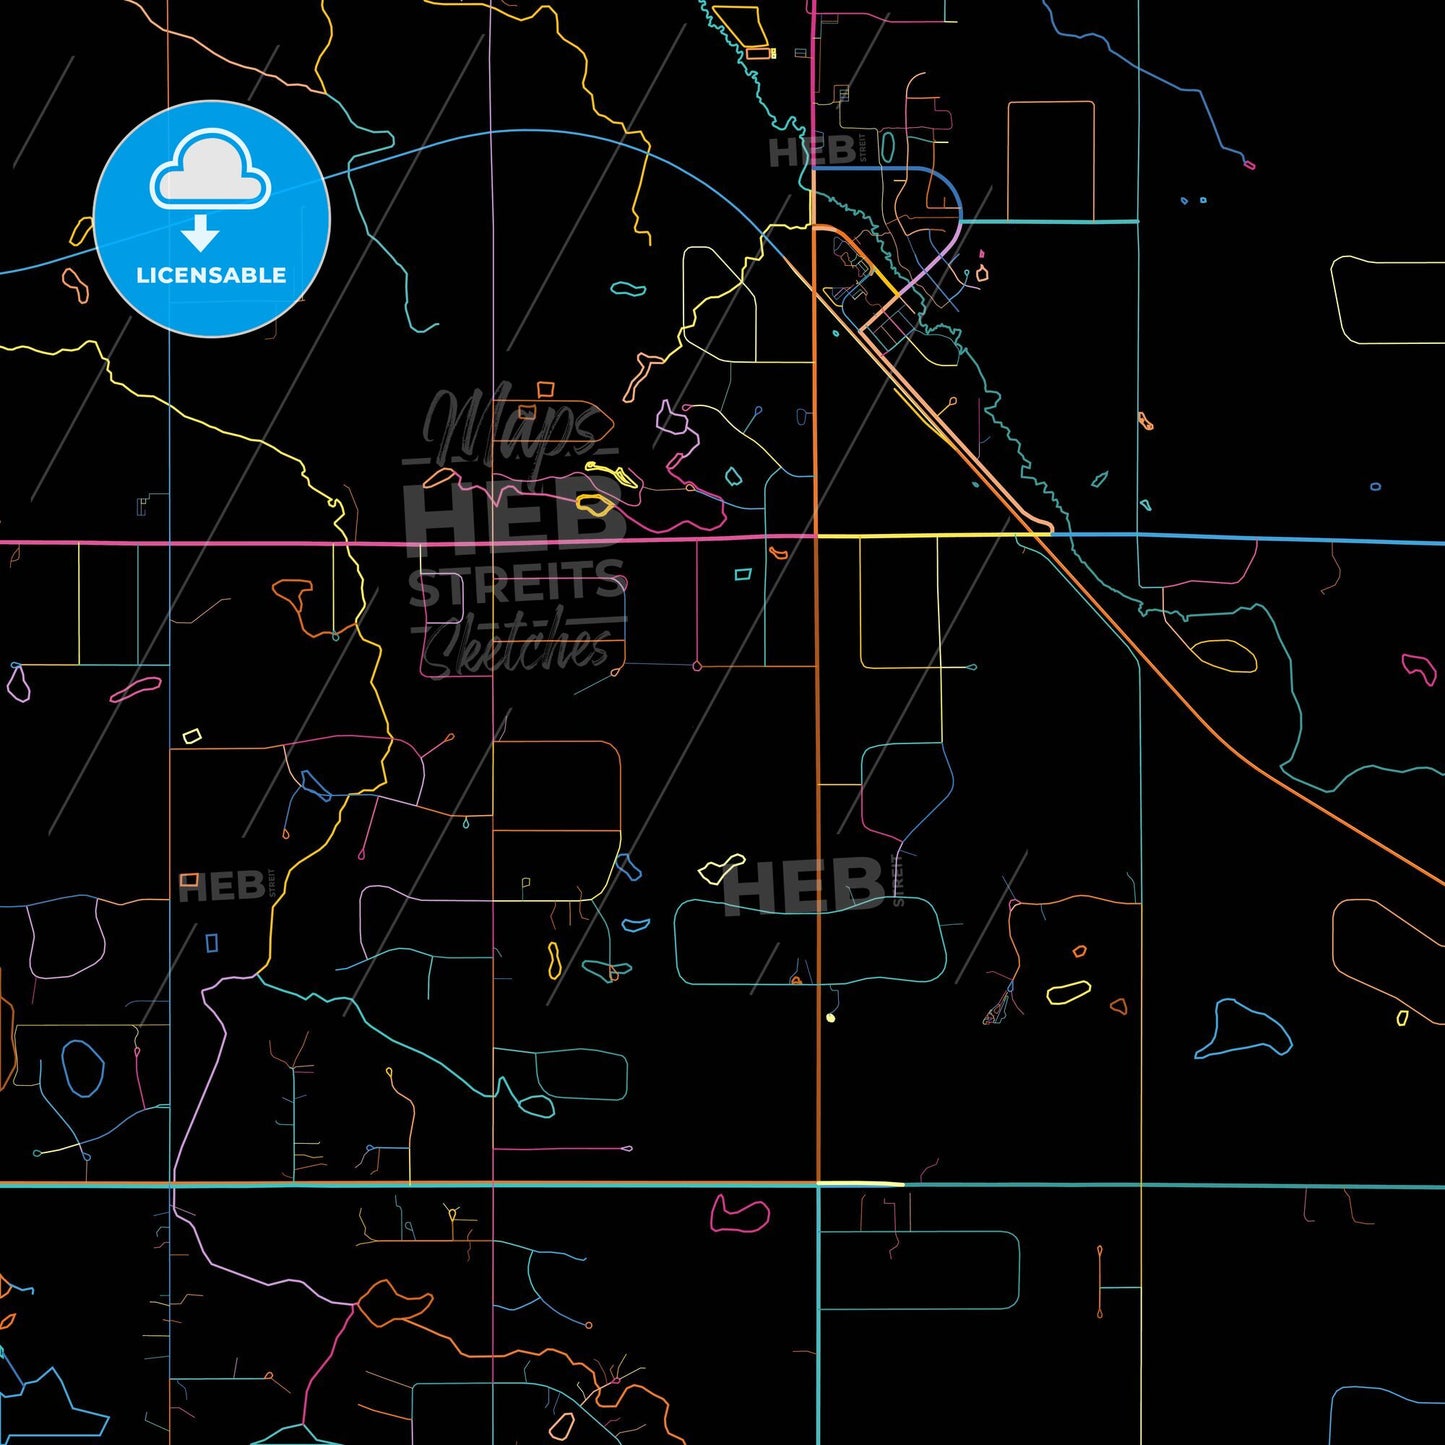 Strathcona County, Alberta, Canada, colorful city map on black background